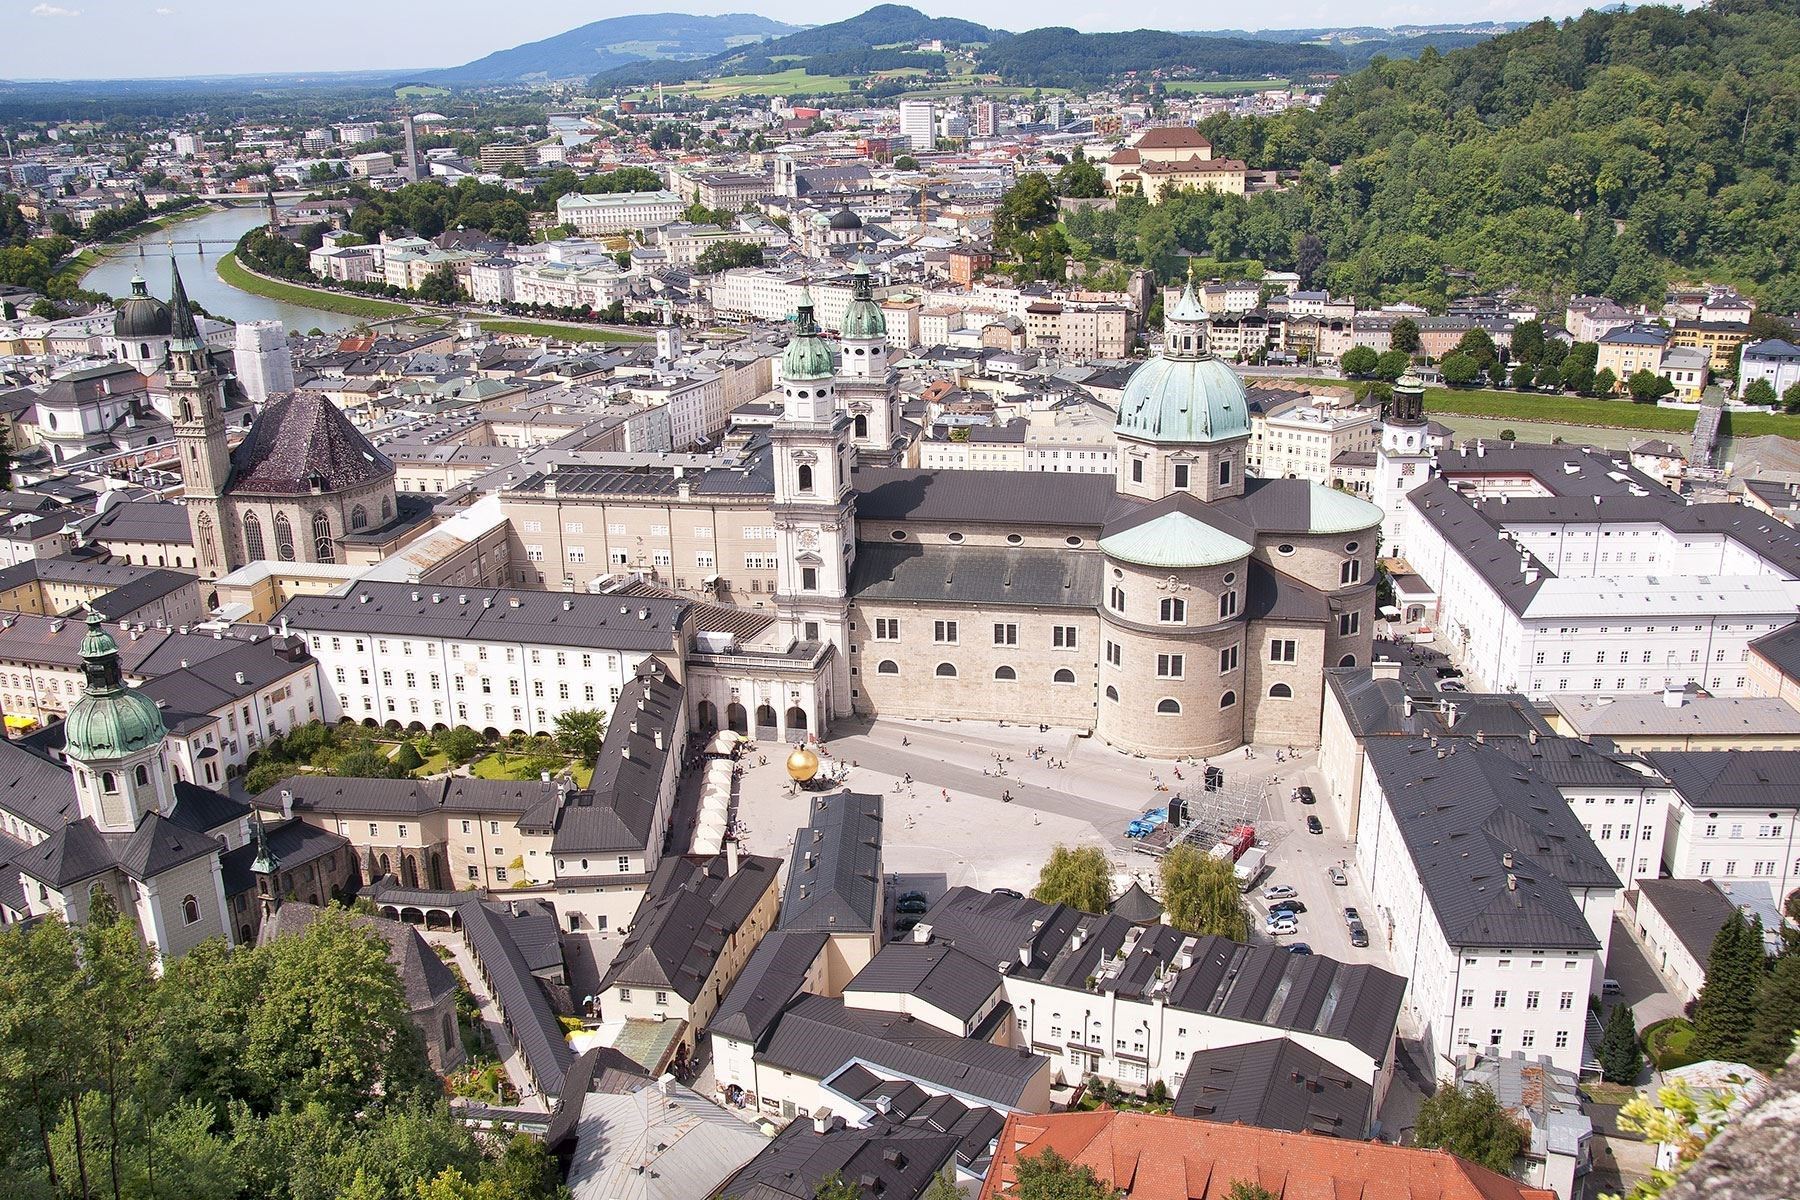 American readers praised the Austrian city for its "mountain vistas" and "warm and friendly" people. "It’s like a living theme park, the perfect destination for young kids on their first trip to Europe".